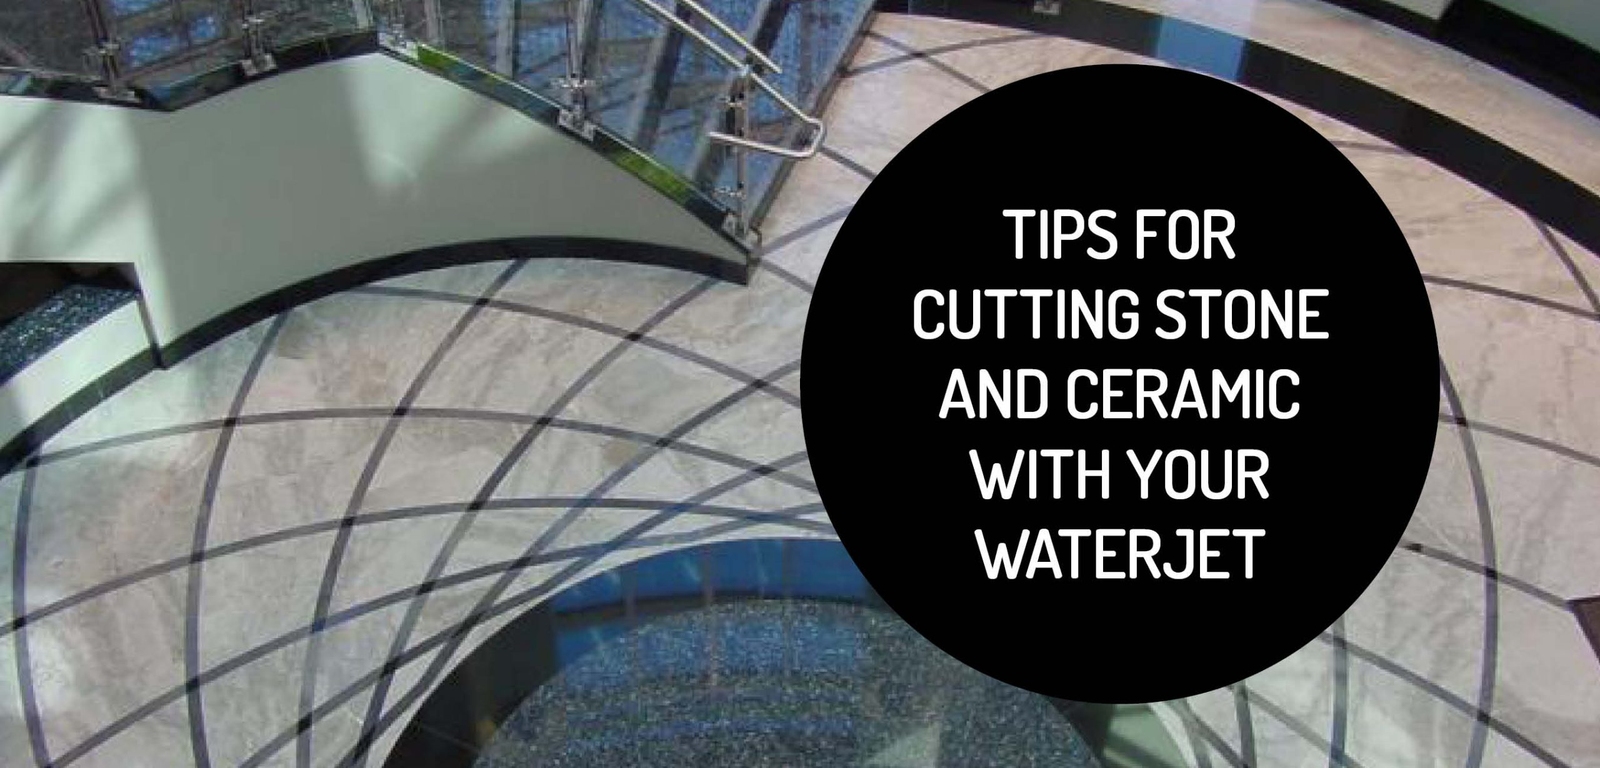 Tips for Cutting Stone and Ceramic With Your Waterjet